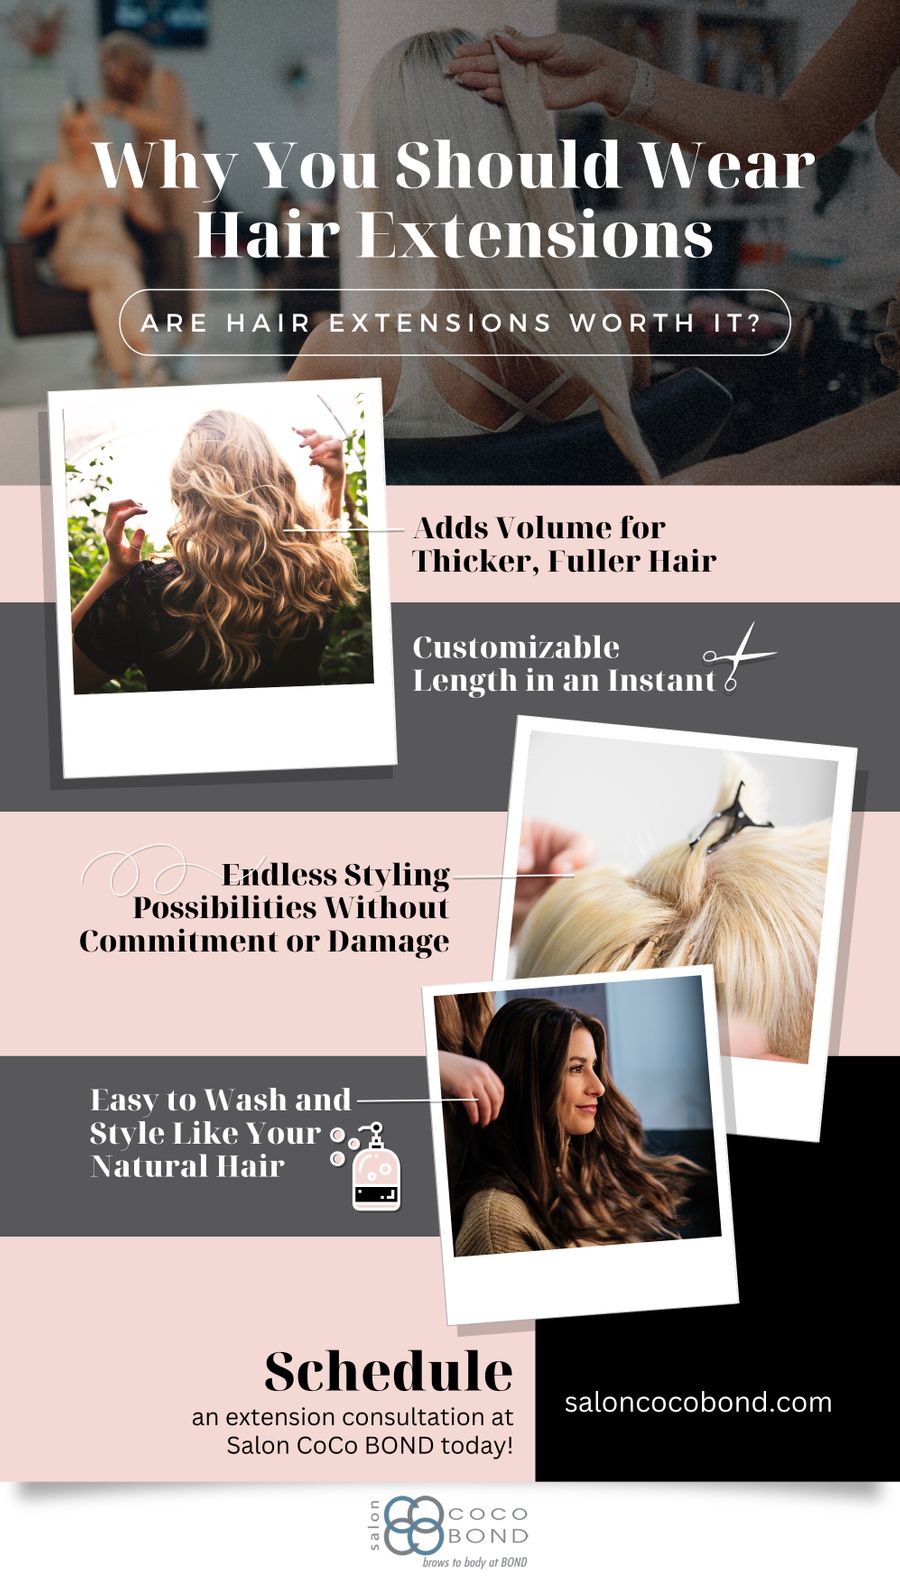 M35192 - Infographic - 4 Benefits of Wearing Hair Extensions.jpg